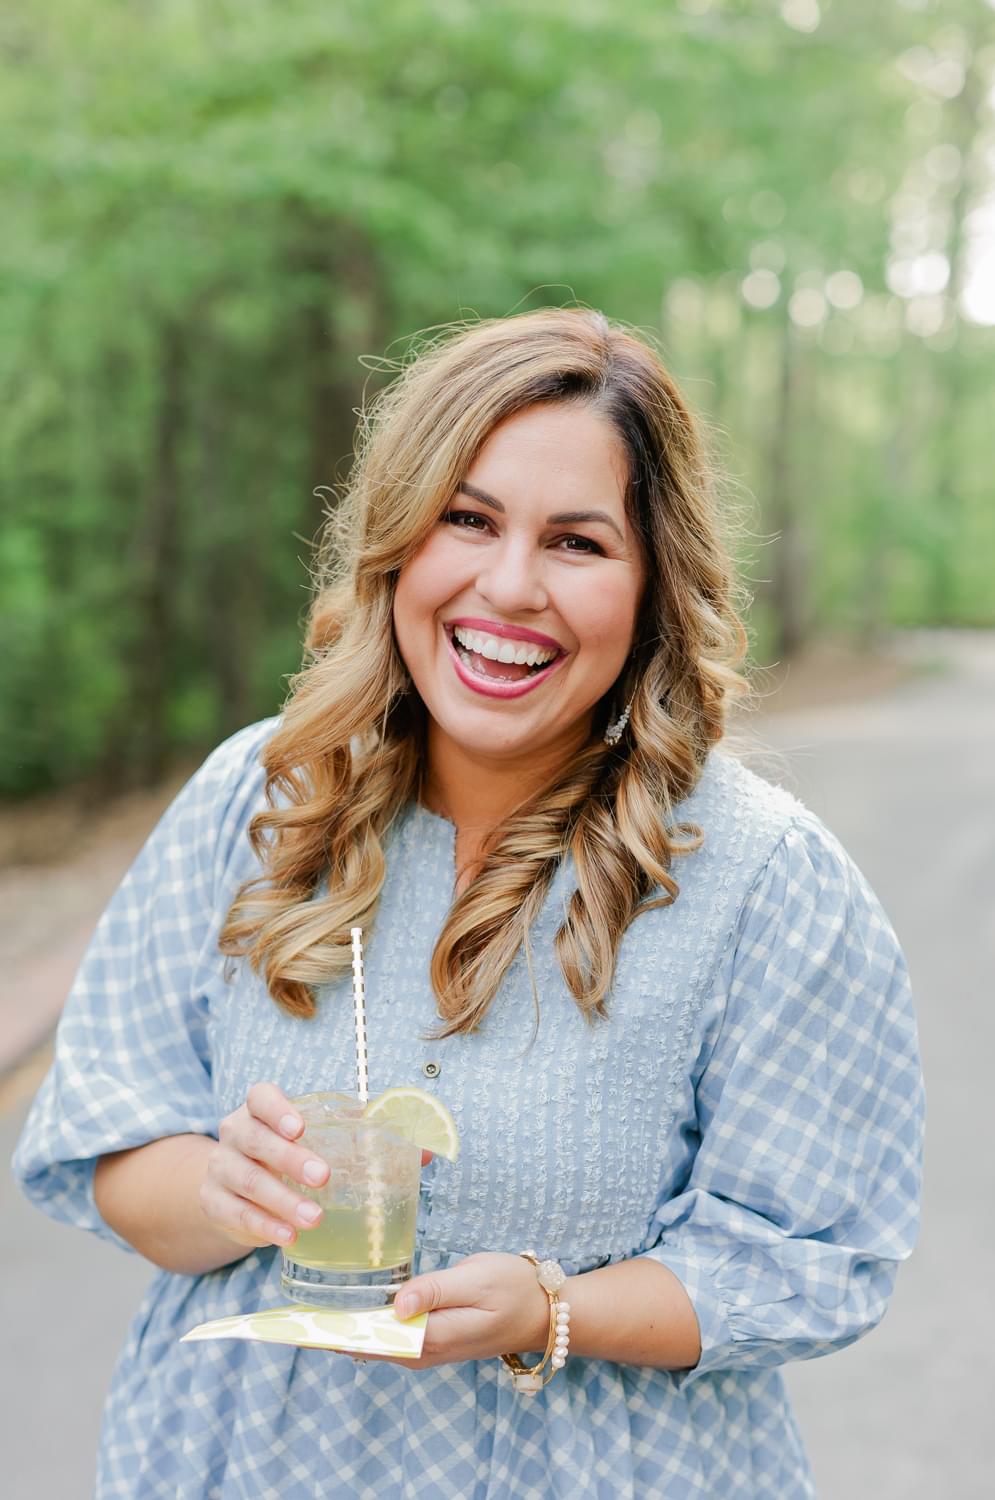 Amber Housley, a business coach and marketing strategist